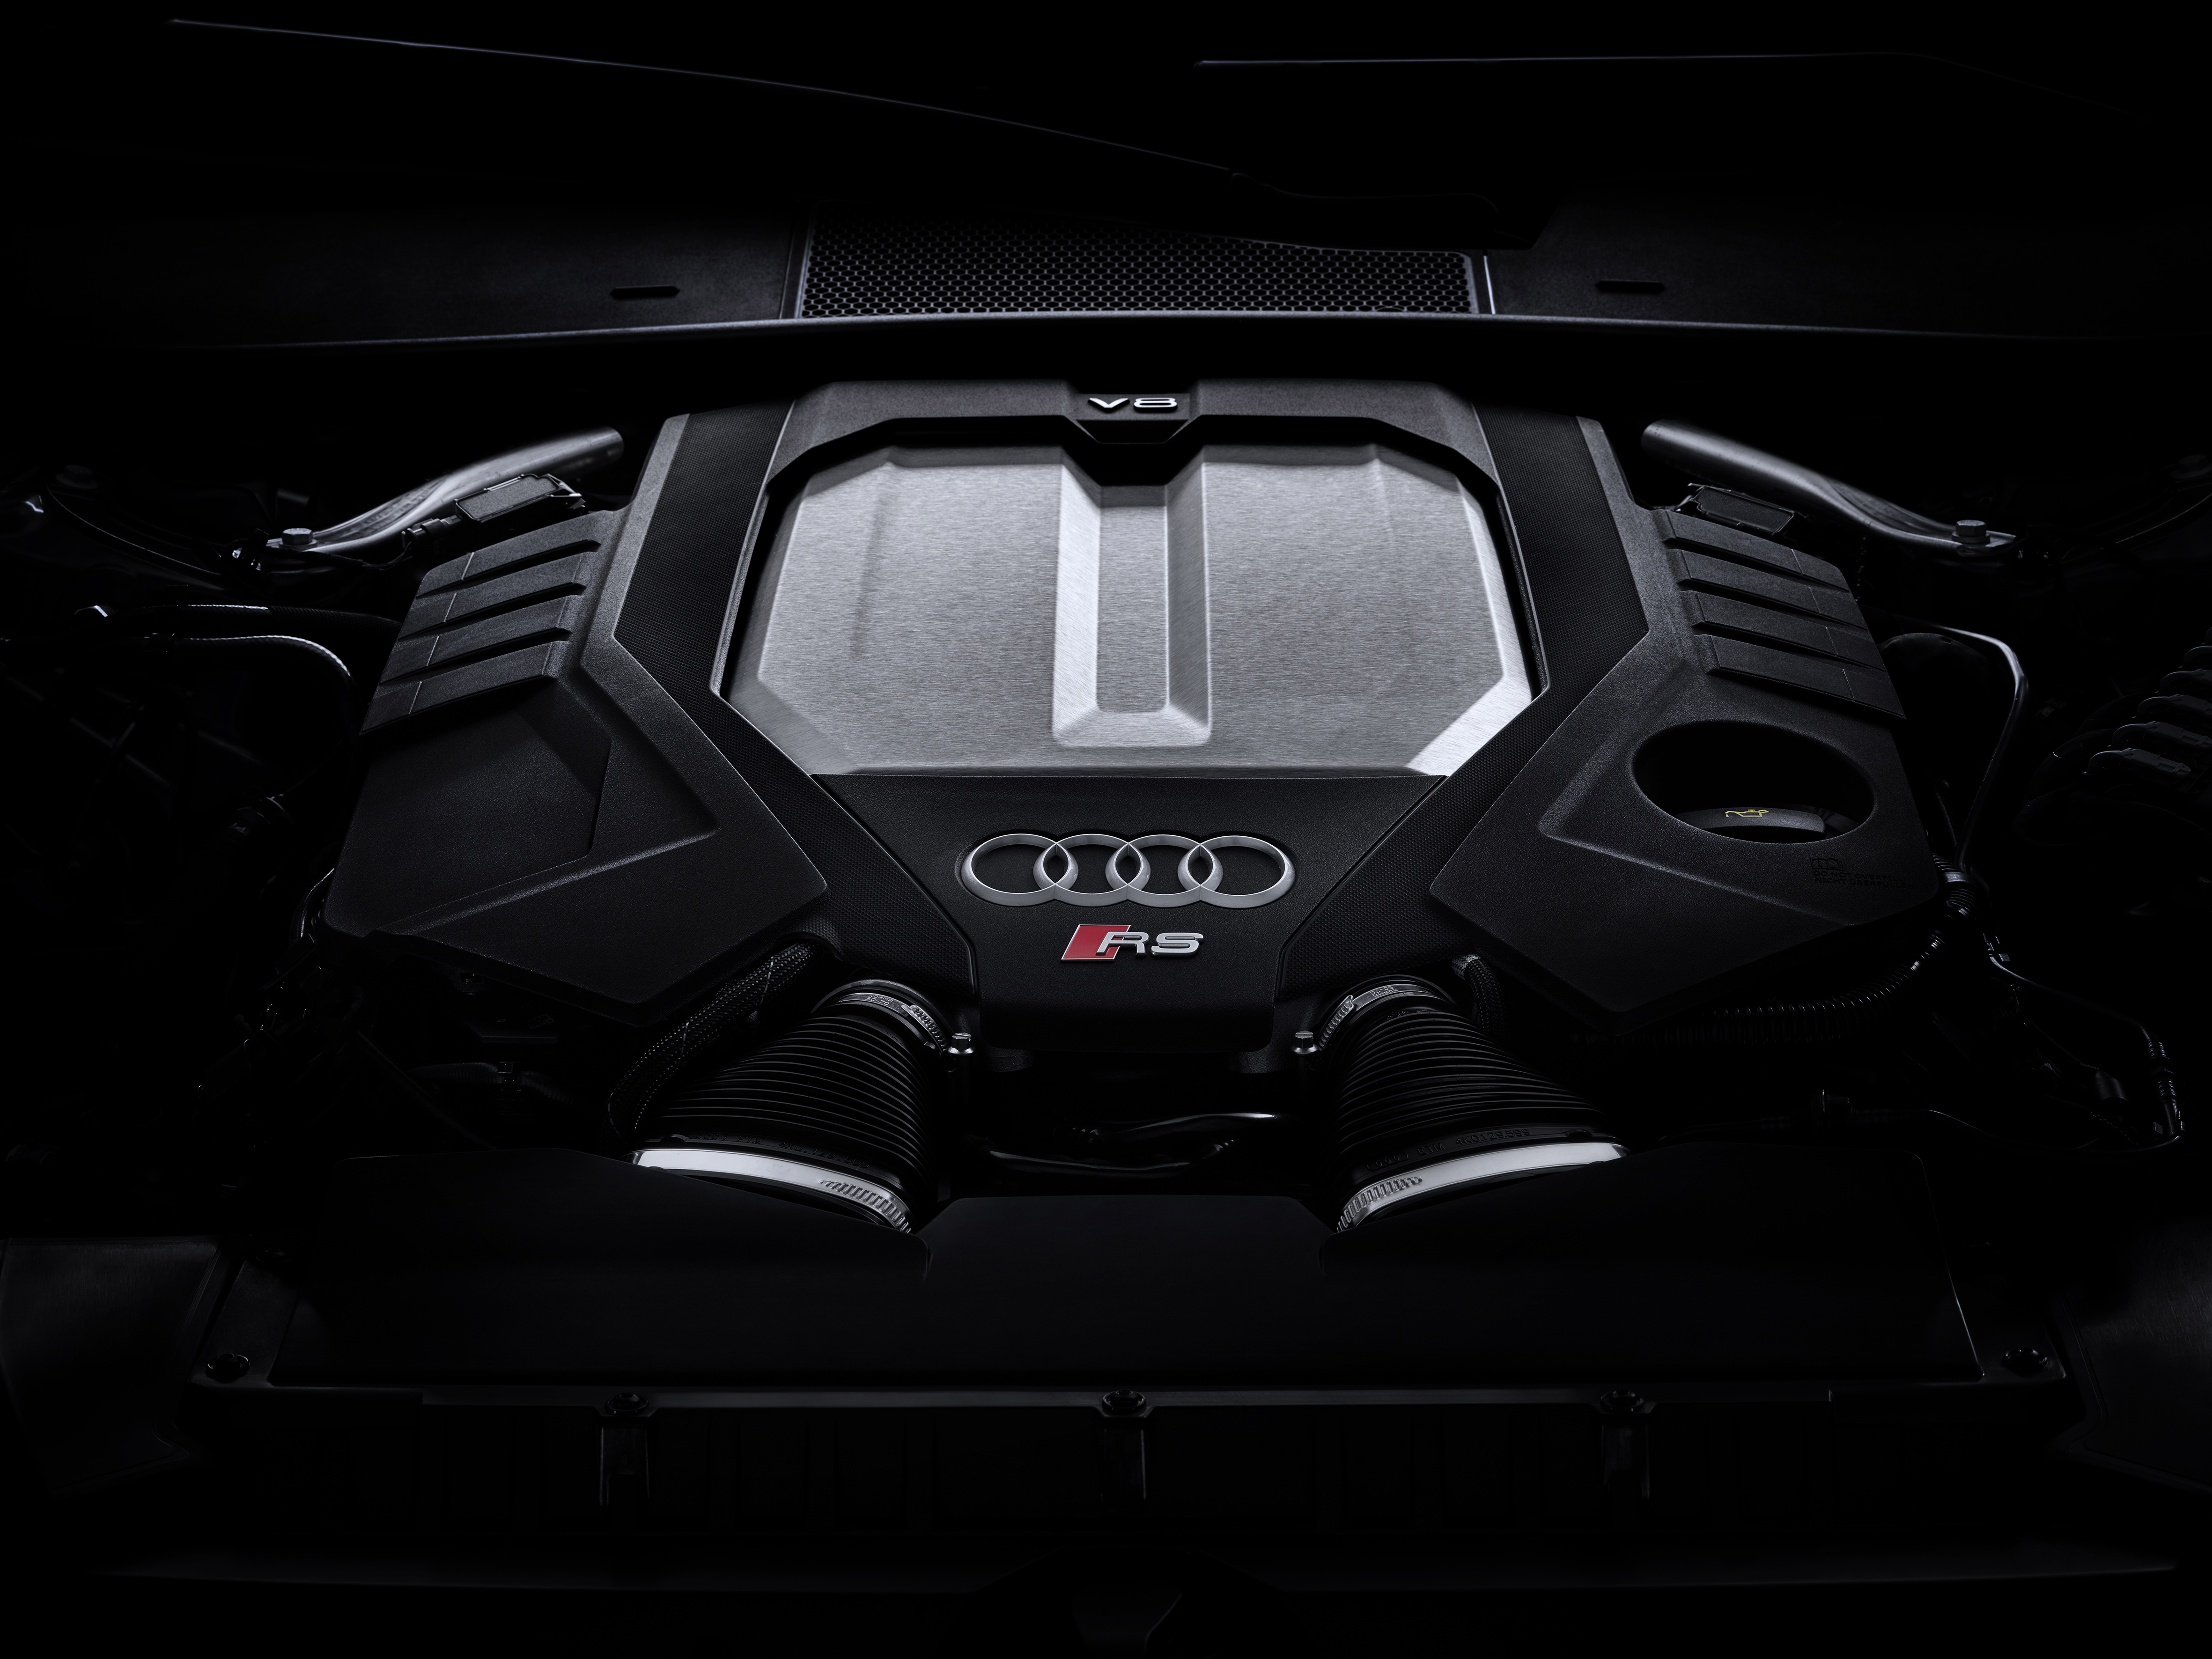 2020 Audi Rs6 Gto Style Wallpapers